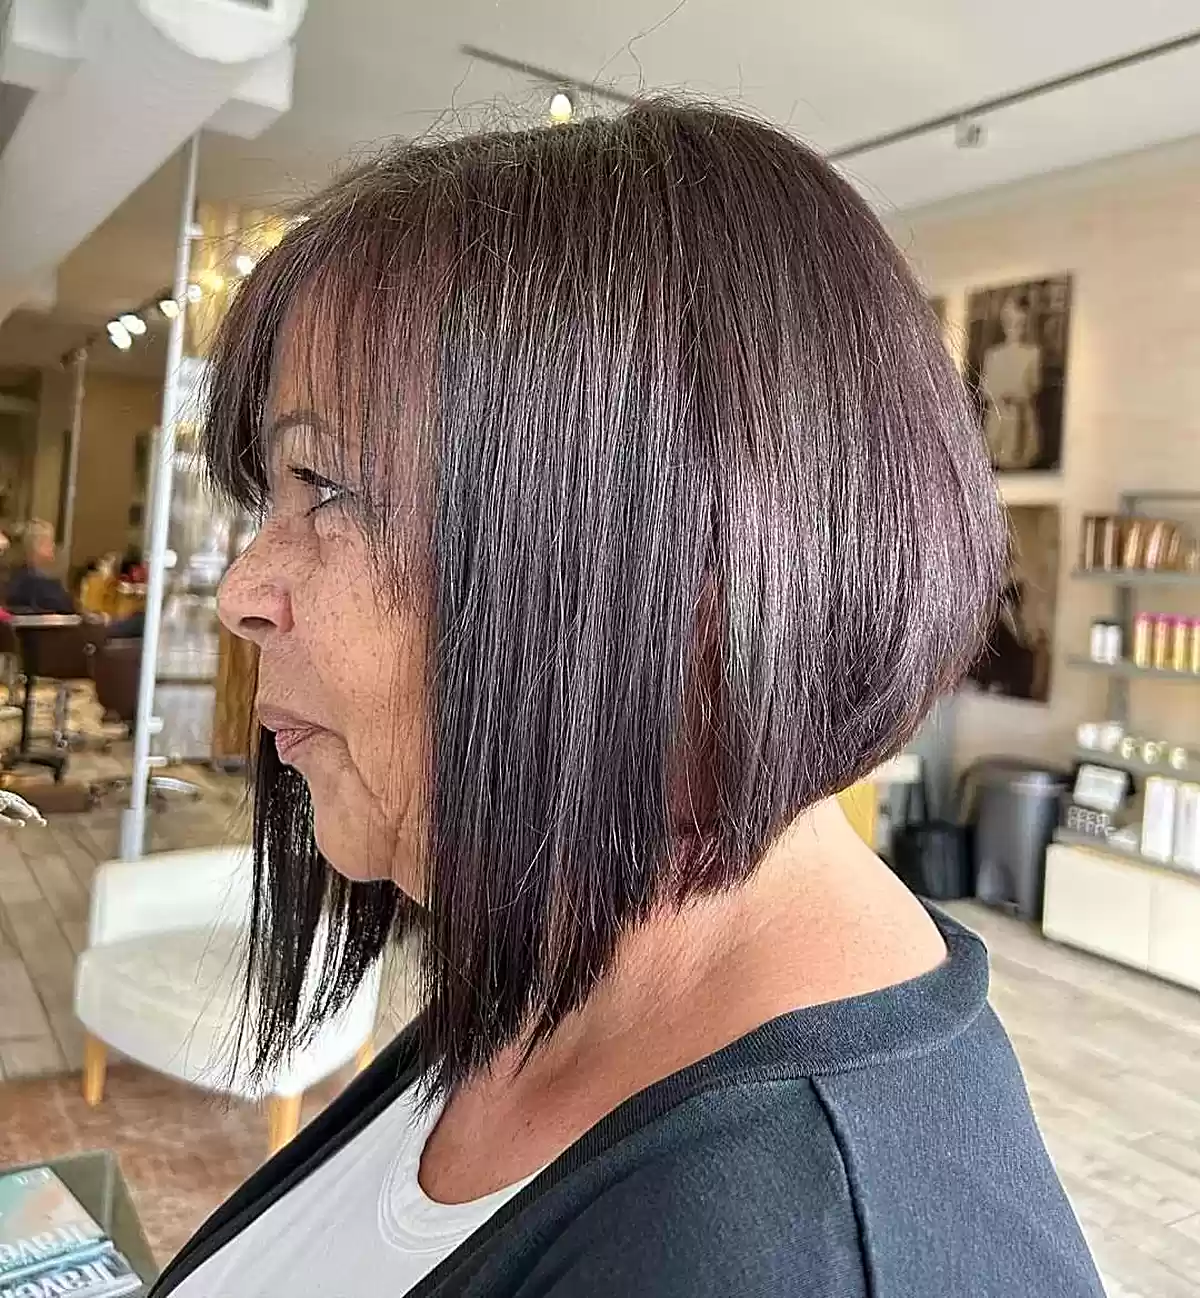 Short A-Line Straight Bob with Thin Bangs for Overweight Mature Women Aged 50